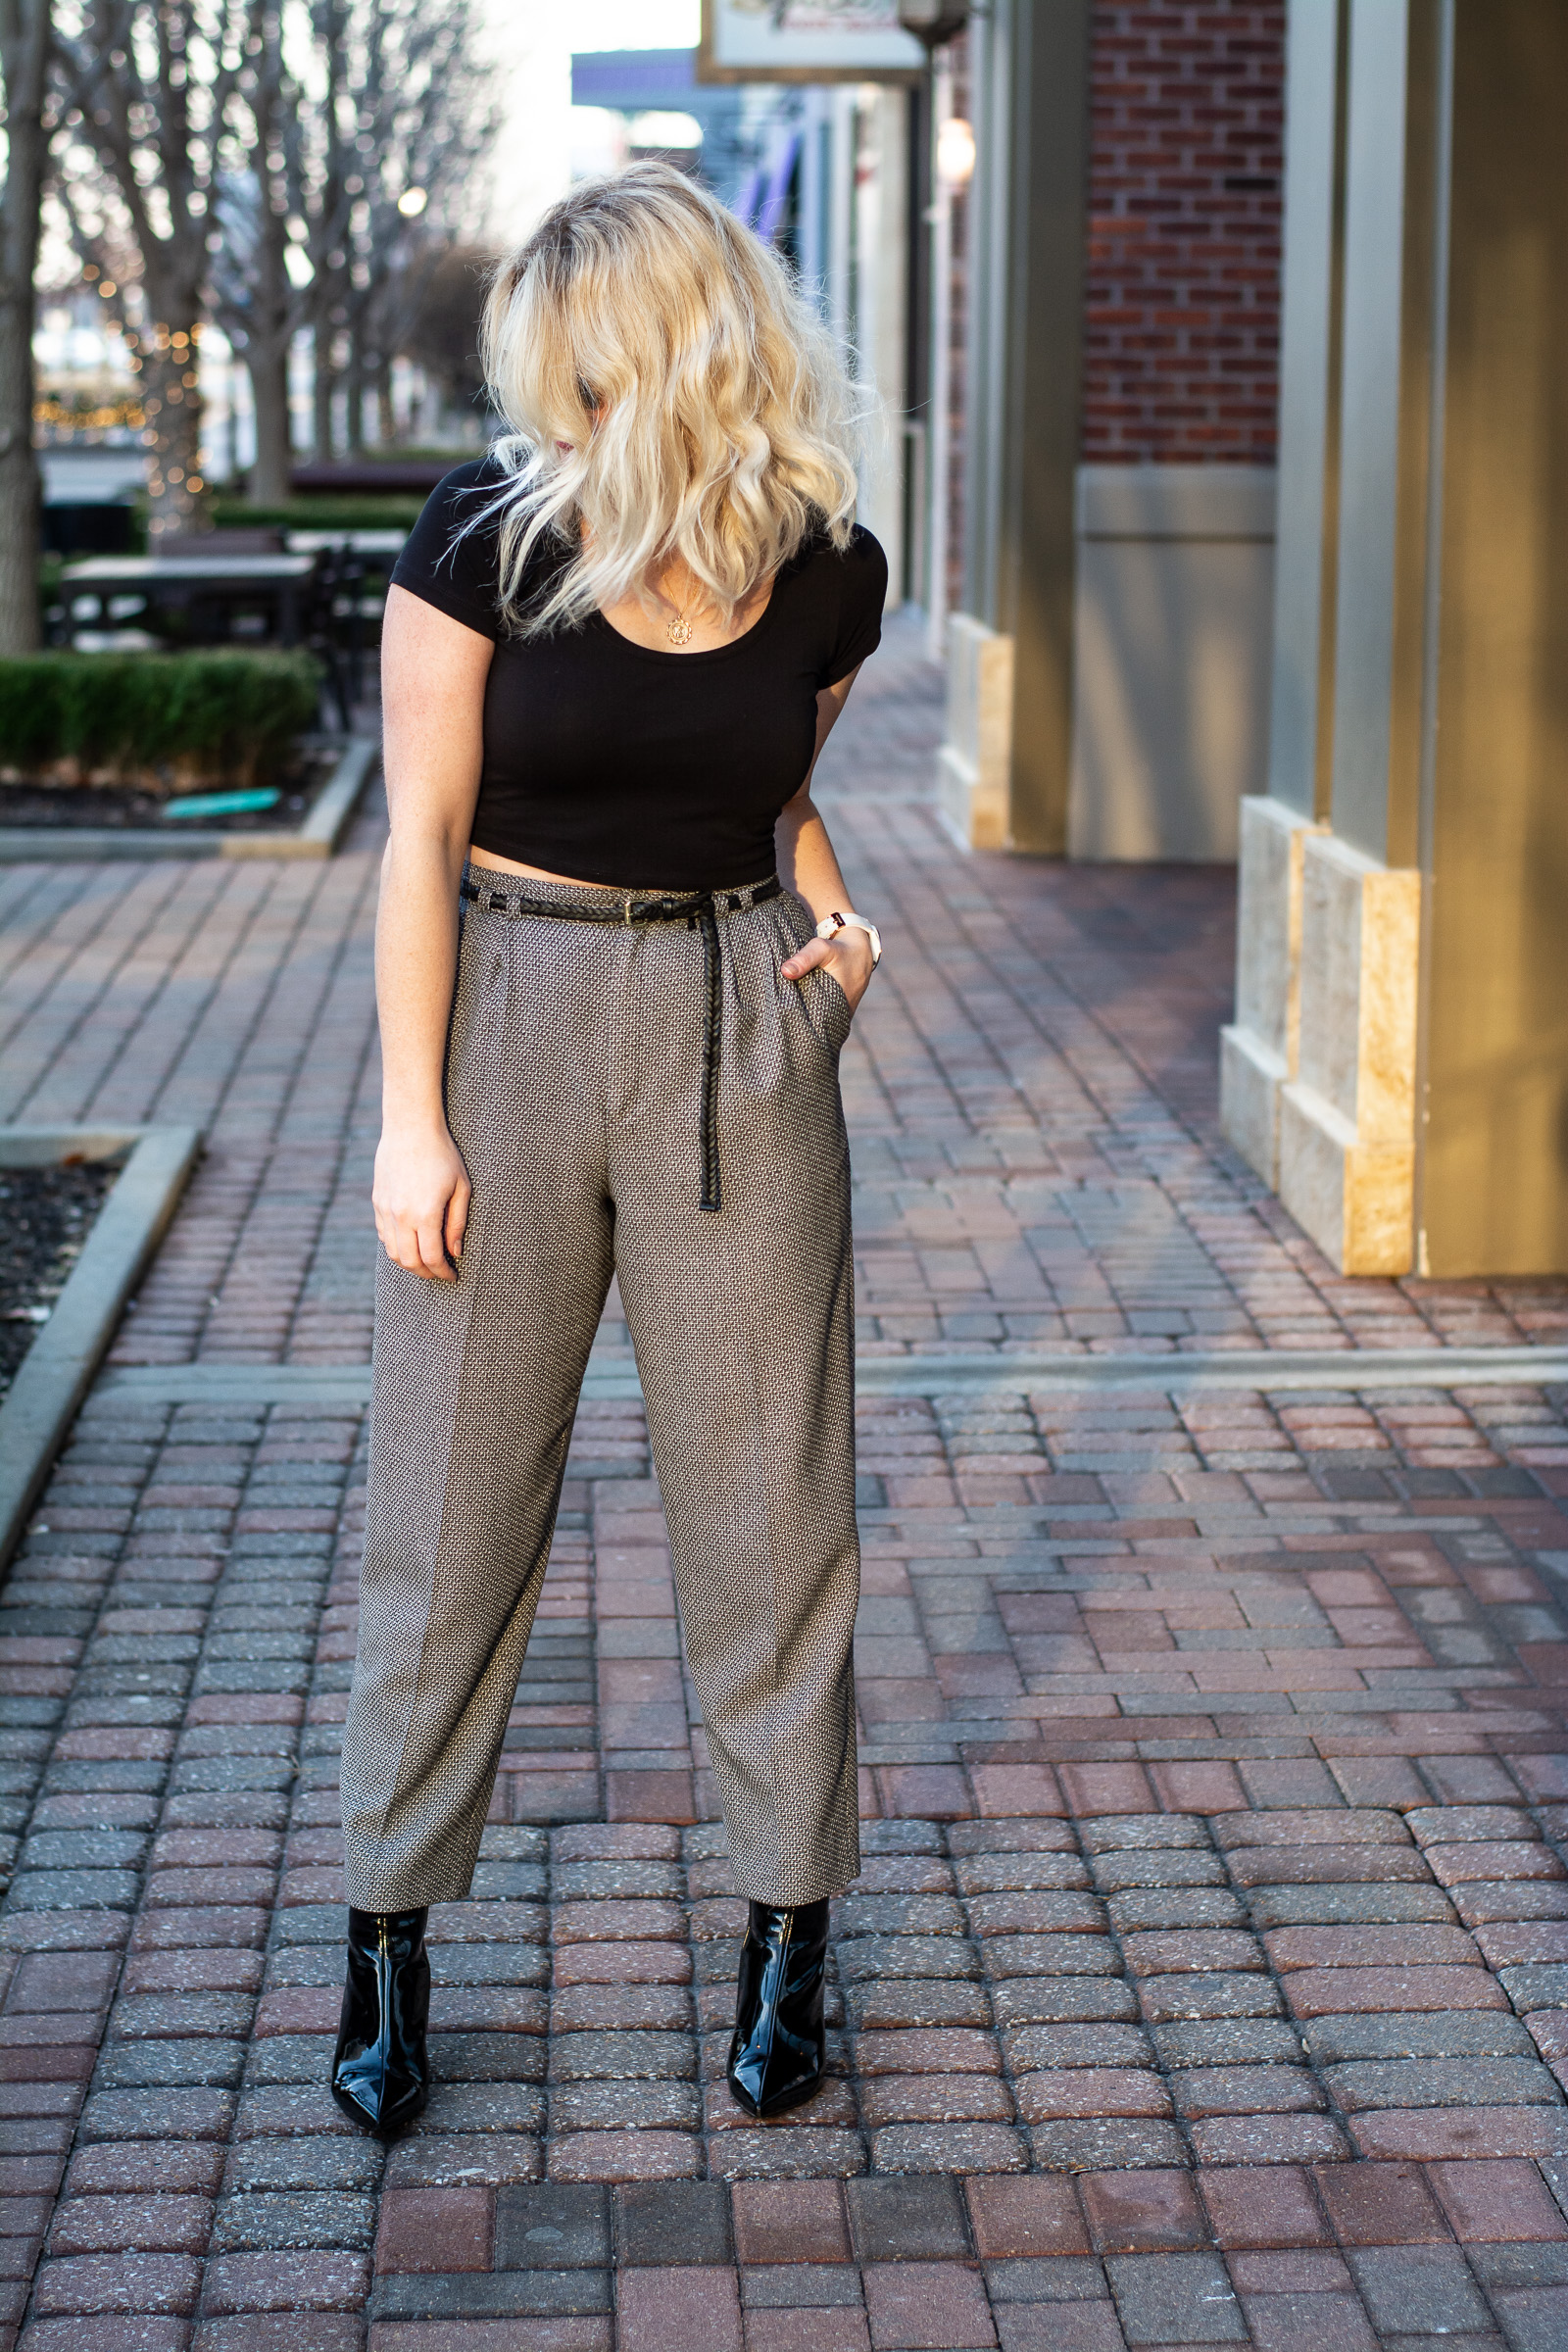 90s Trousers with a Crop Top and Space Boots. | Le Stylo Rouge